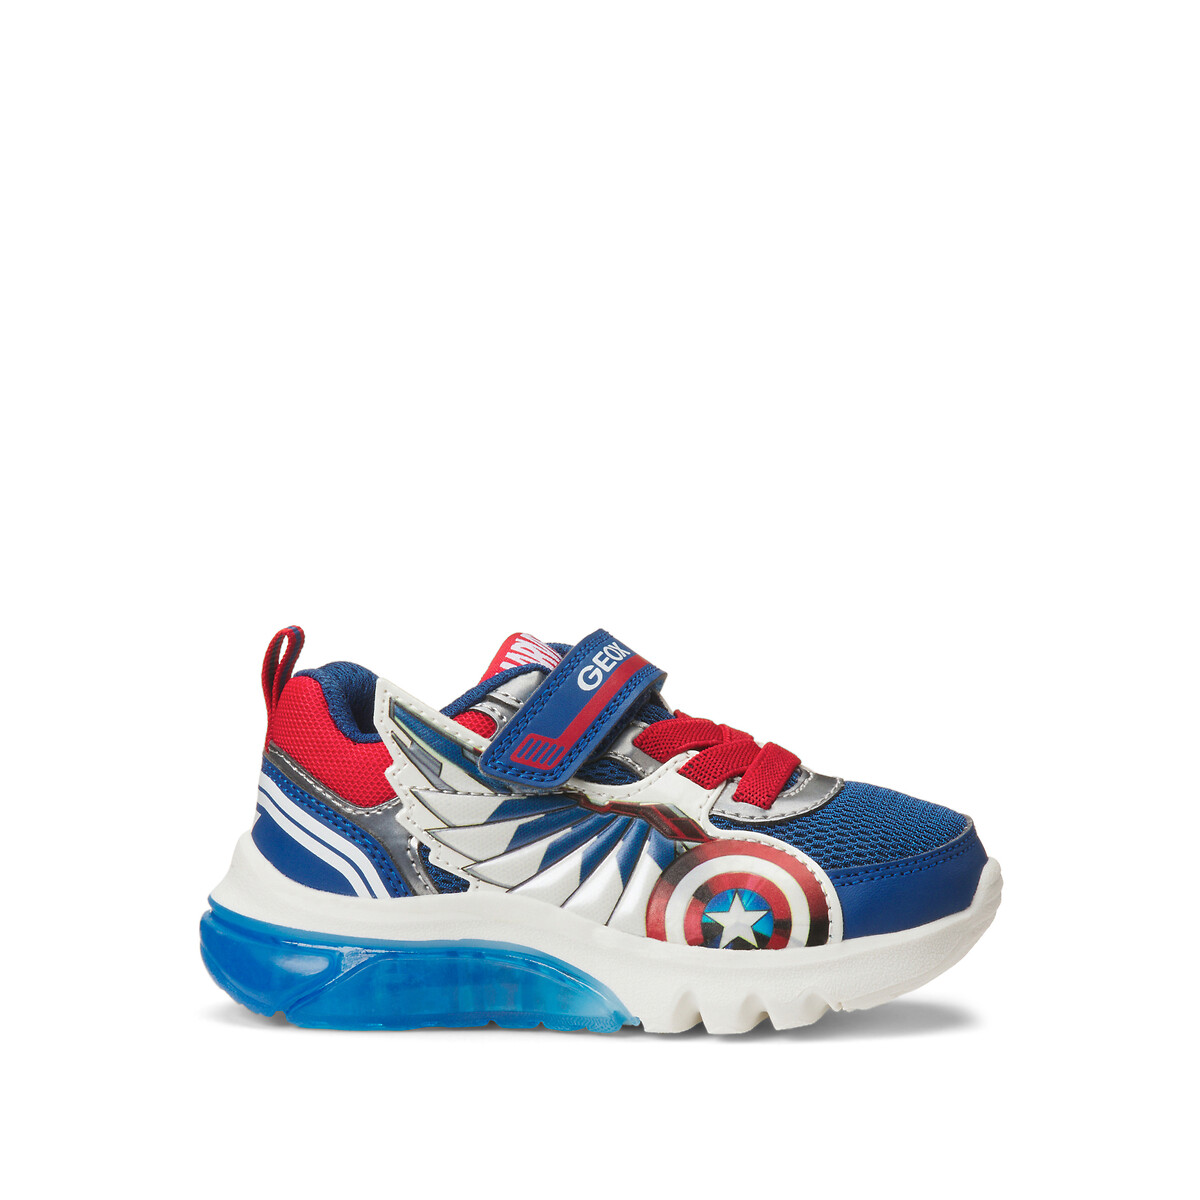 Image of Kids Ciberdron x Captain America LED Breathable Trainers